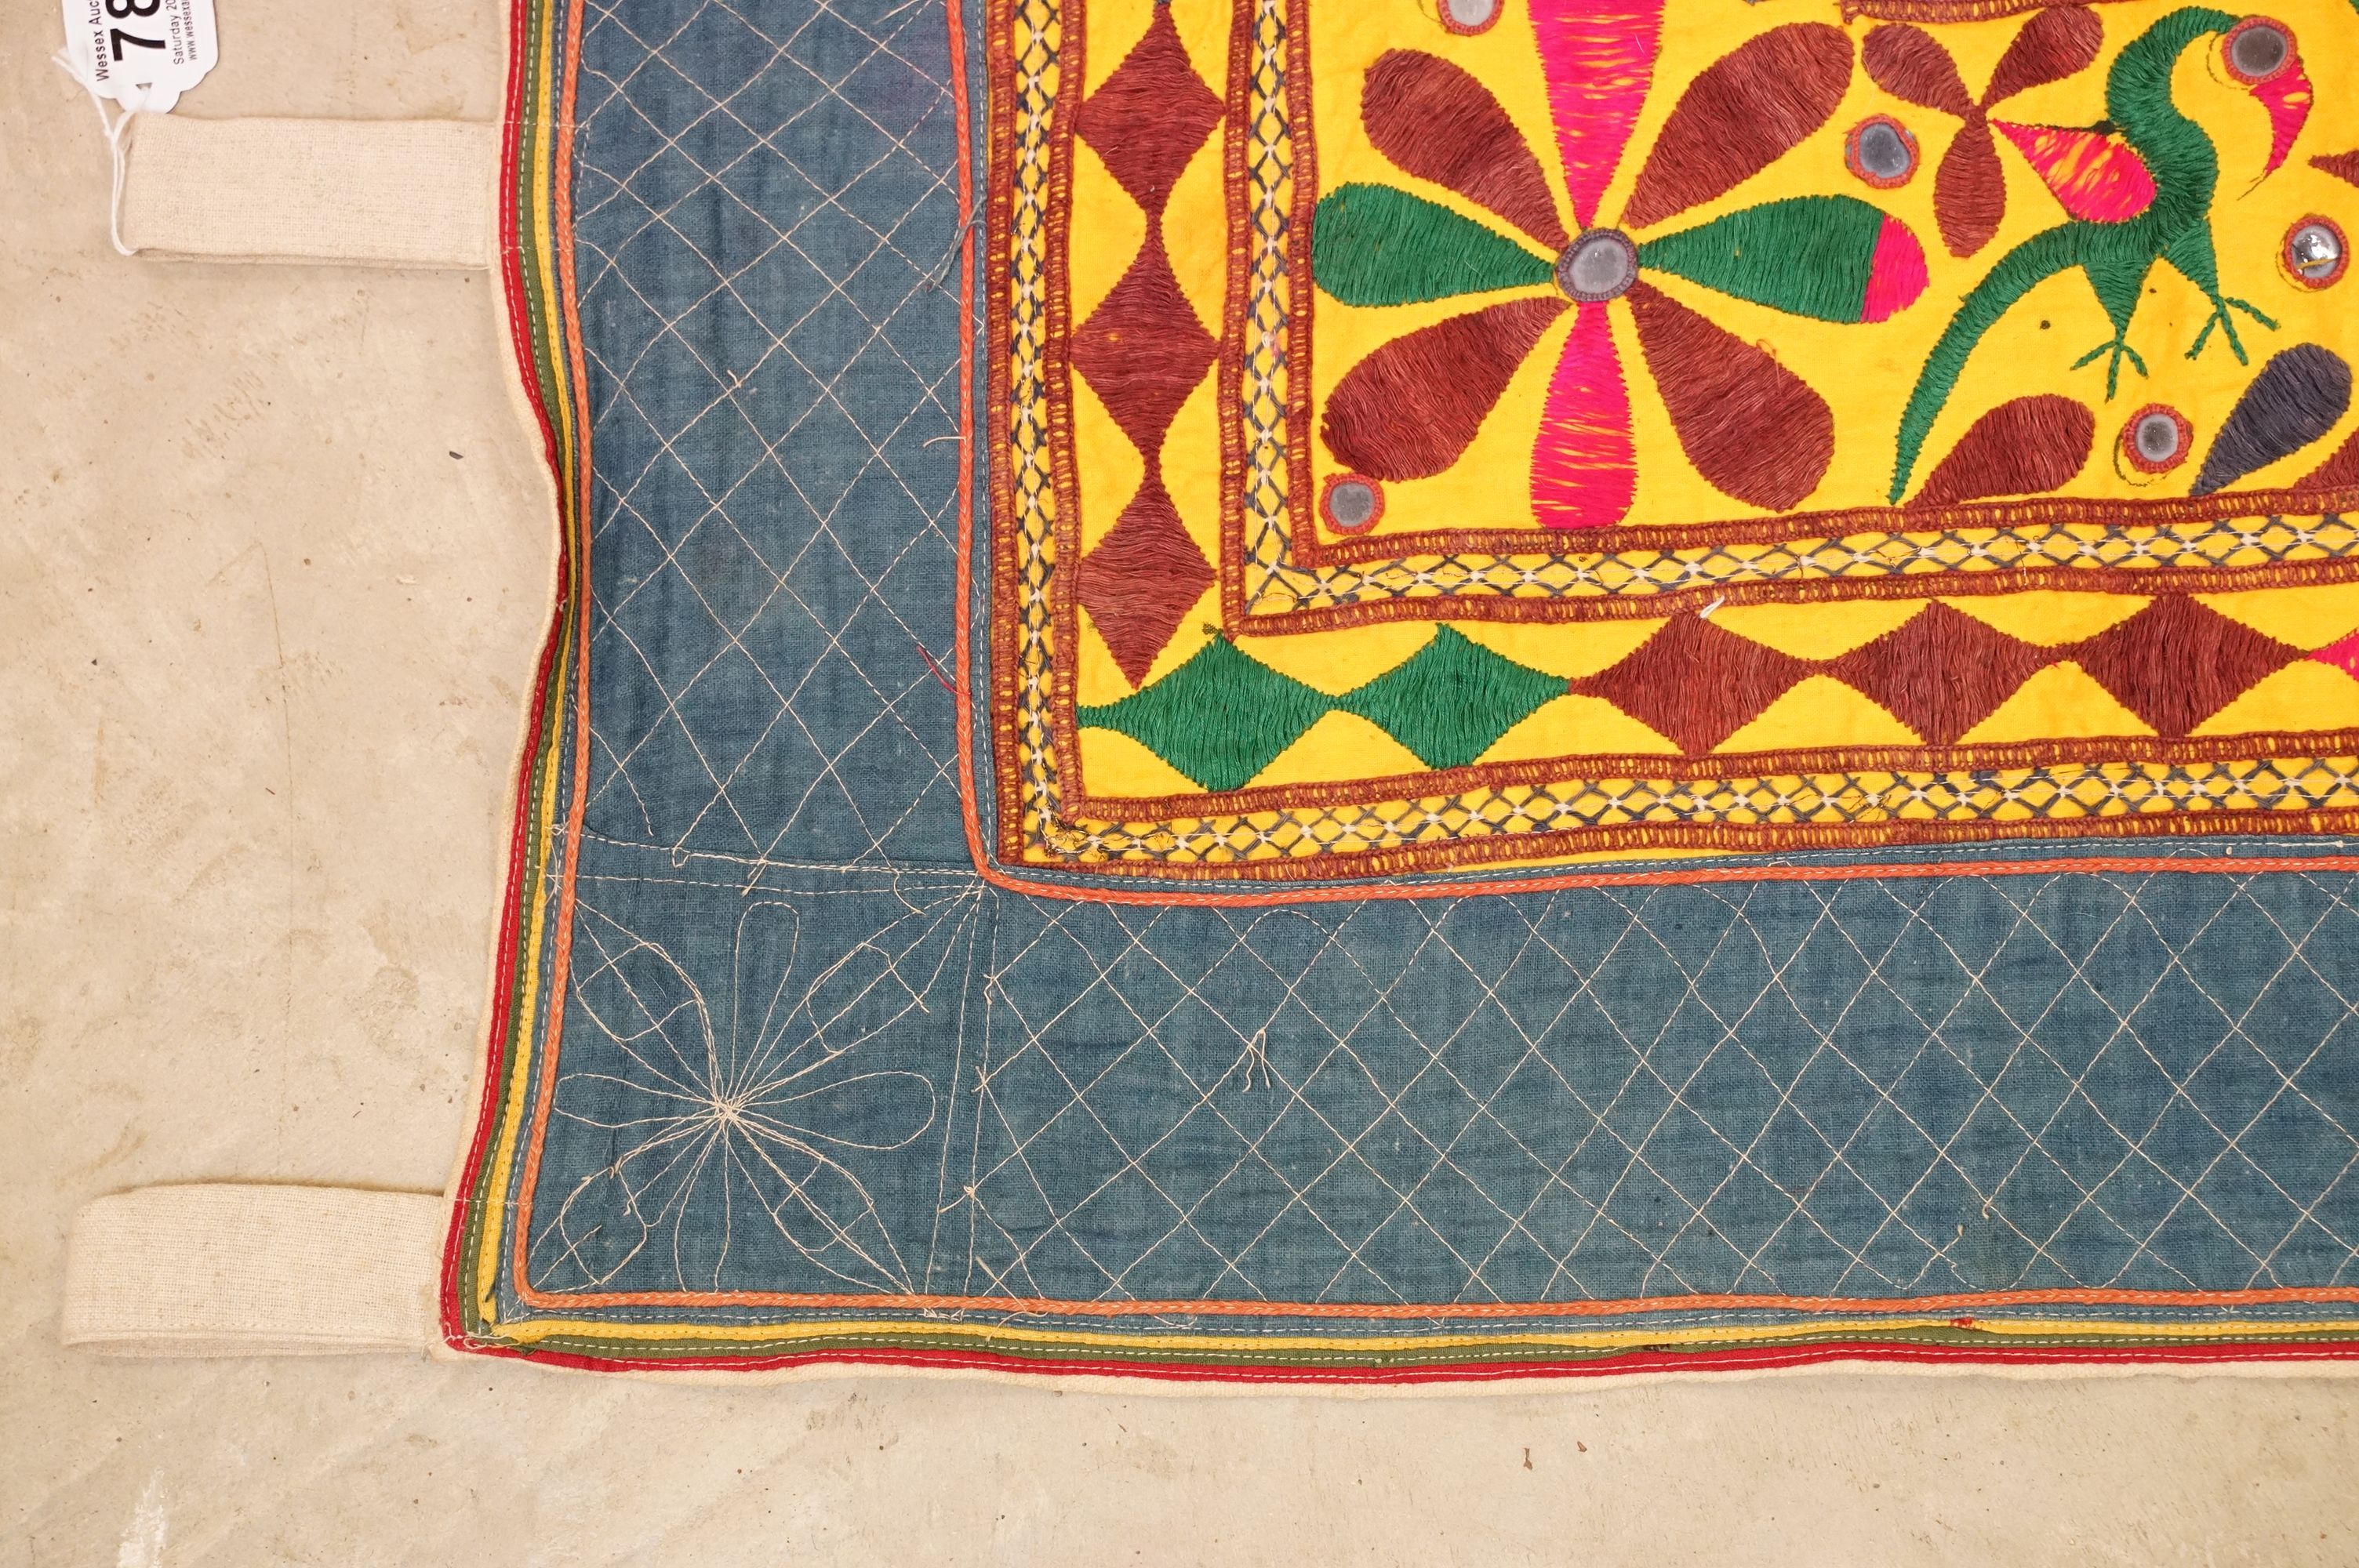 Collection of Indian and middle eastern textiles to include a pair of Indian embroidered curtains - Image 7 of 14